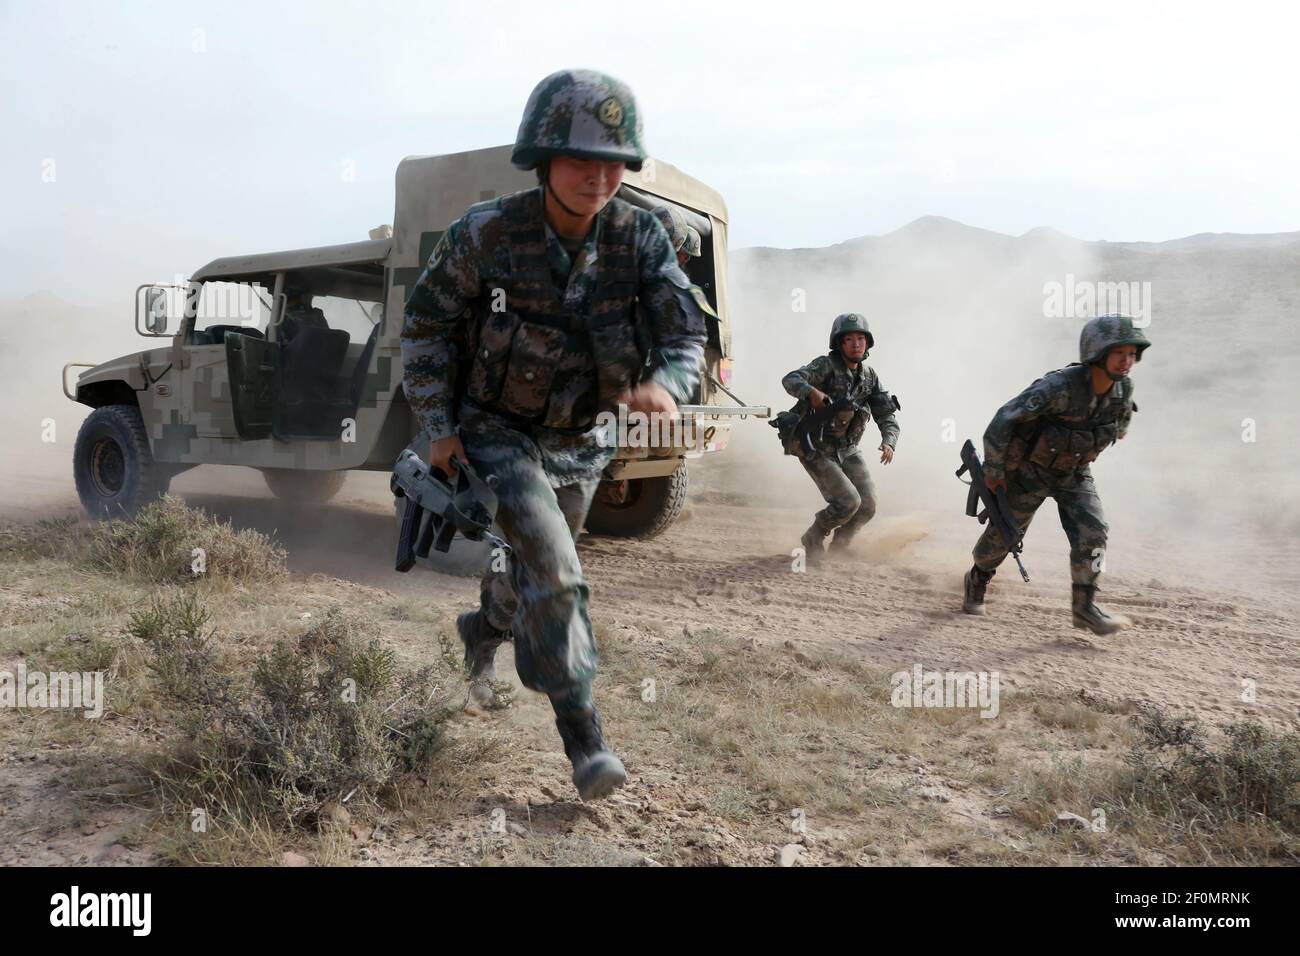 In this undated photo, Chinese soldiers of the PLA 76th Group Army take part in a training session at the Helan Mountains in the border of Inner Mongolia's Alxa League and Ningxia, China. (Photo by Yuan hongyan - Imaginechina/Sipa USA) Stock Photo